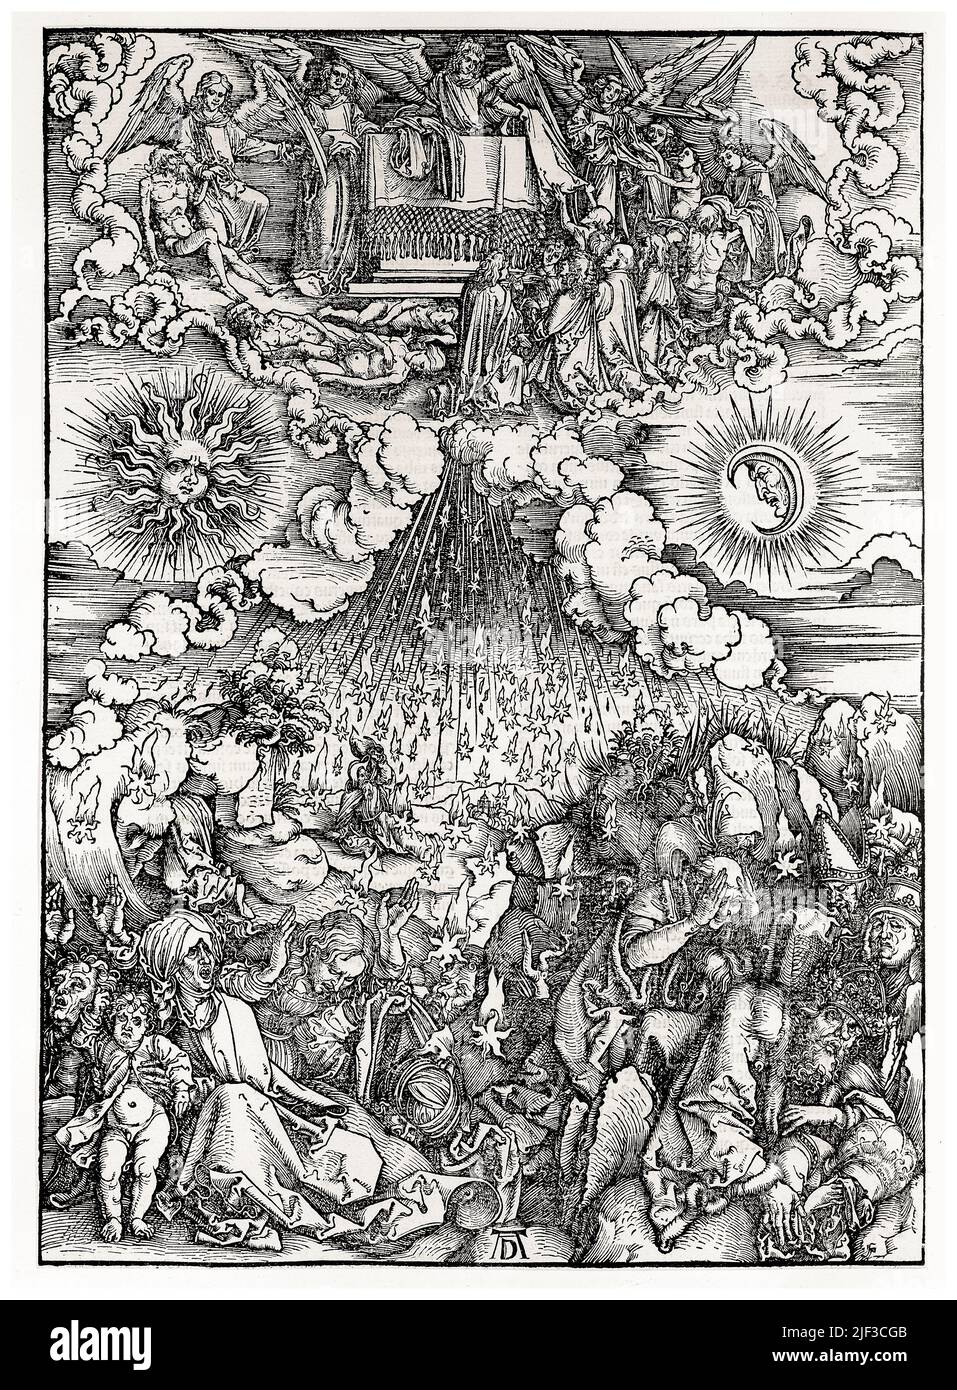 Albrecht Durer, The Apocalypse: The opening of the fifth and sixth seals, woodcut print circa 1511 Stock Photo